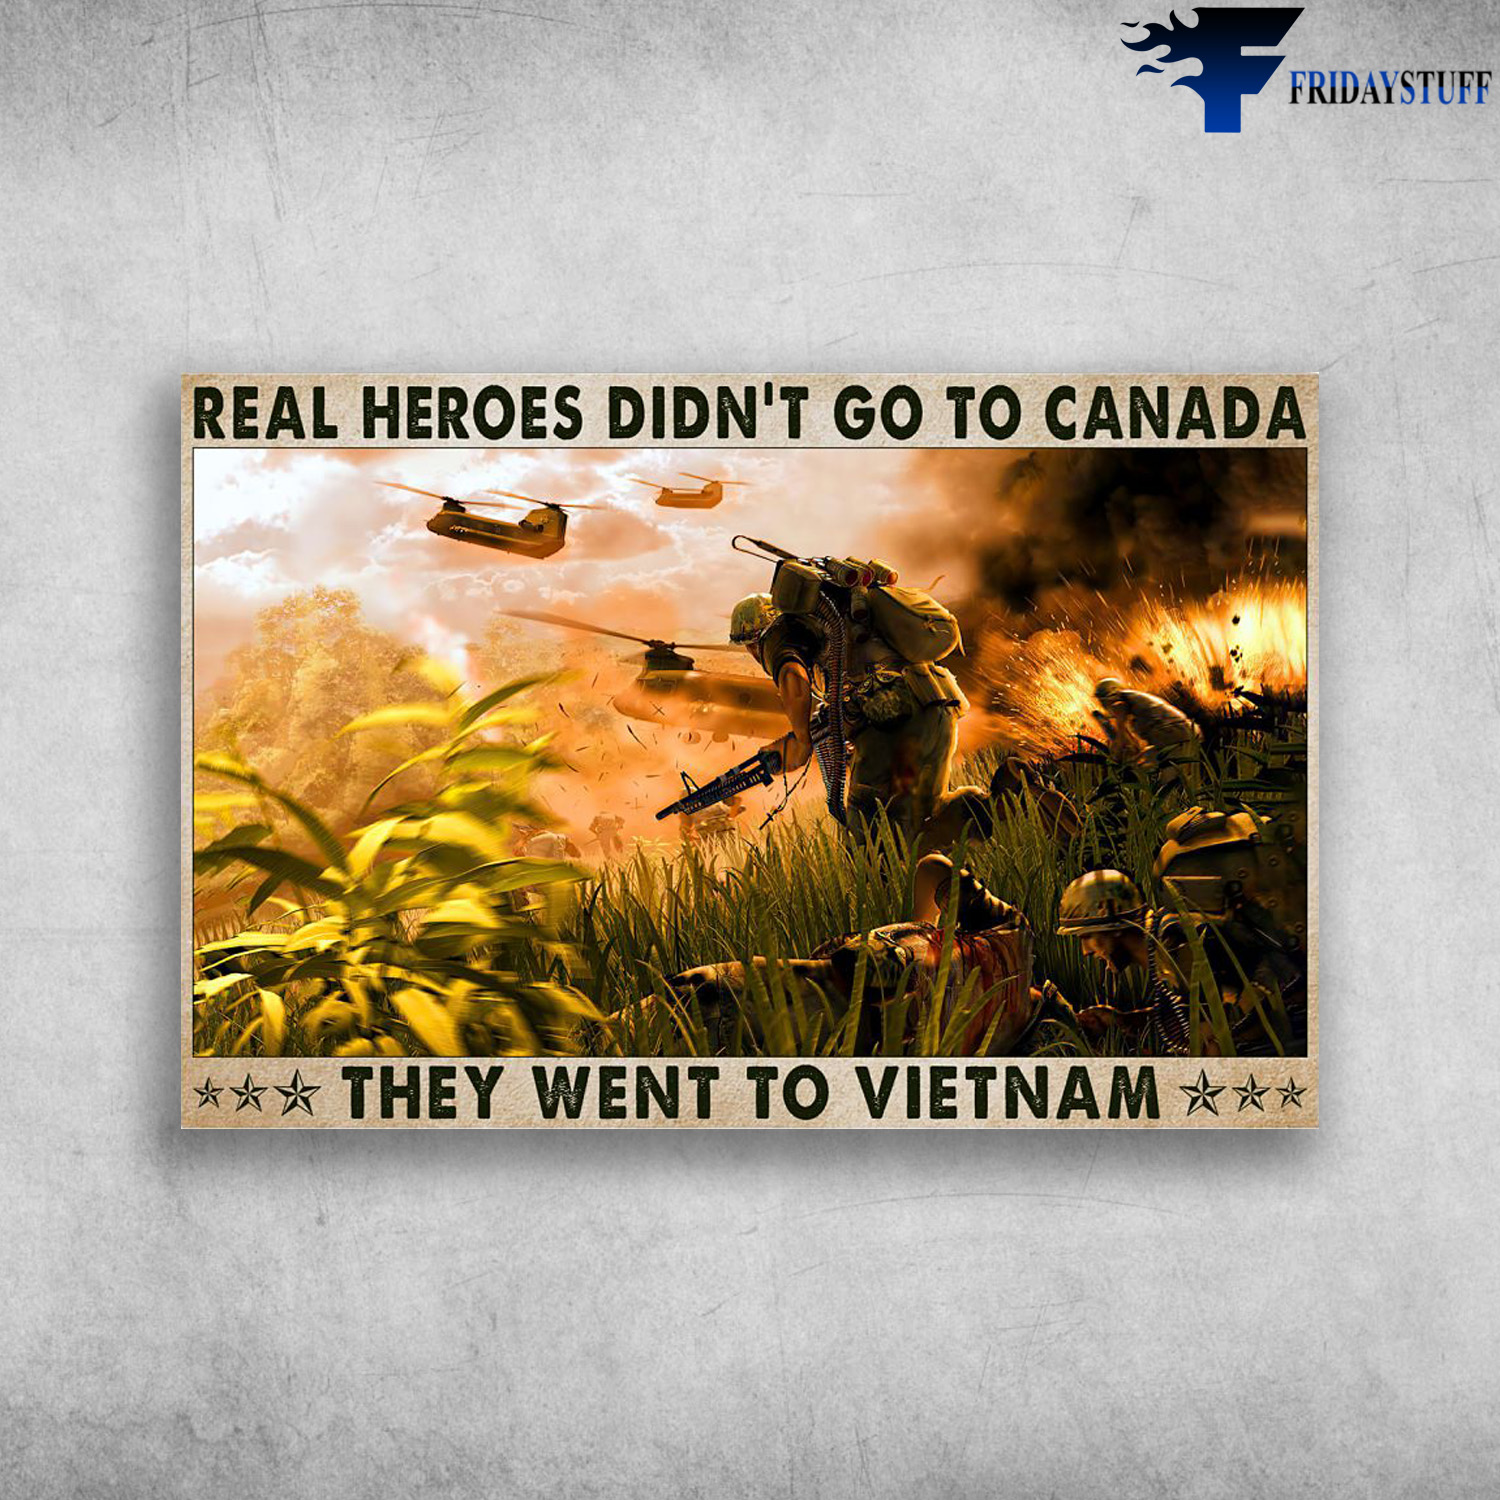 The Soldier In Battlefield - Real Heros Didn't Go To Canada, The When To Vietnam